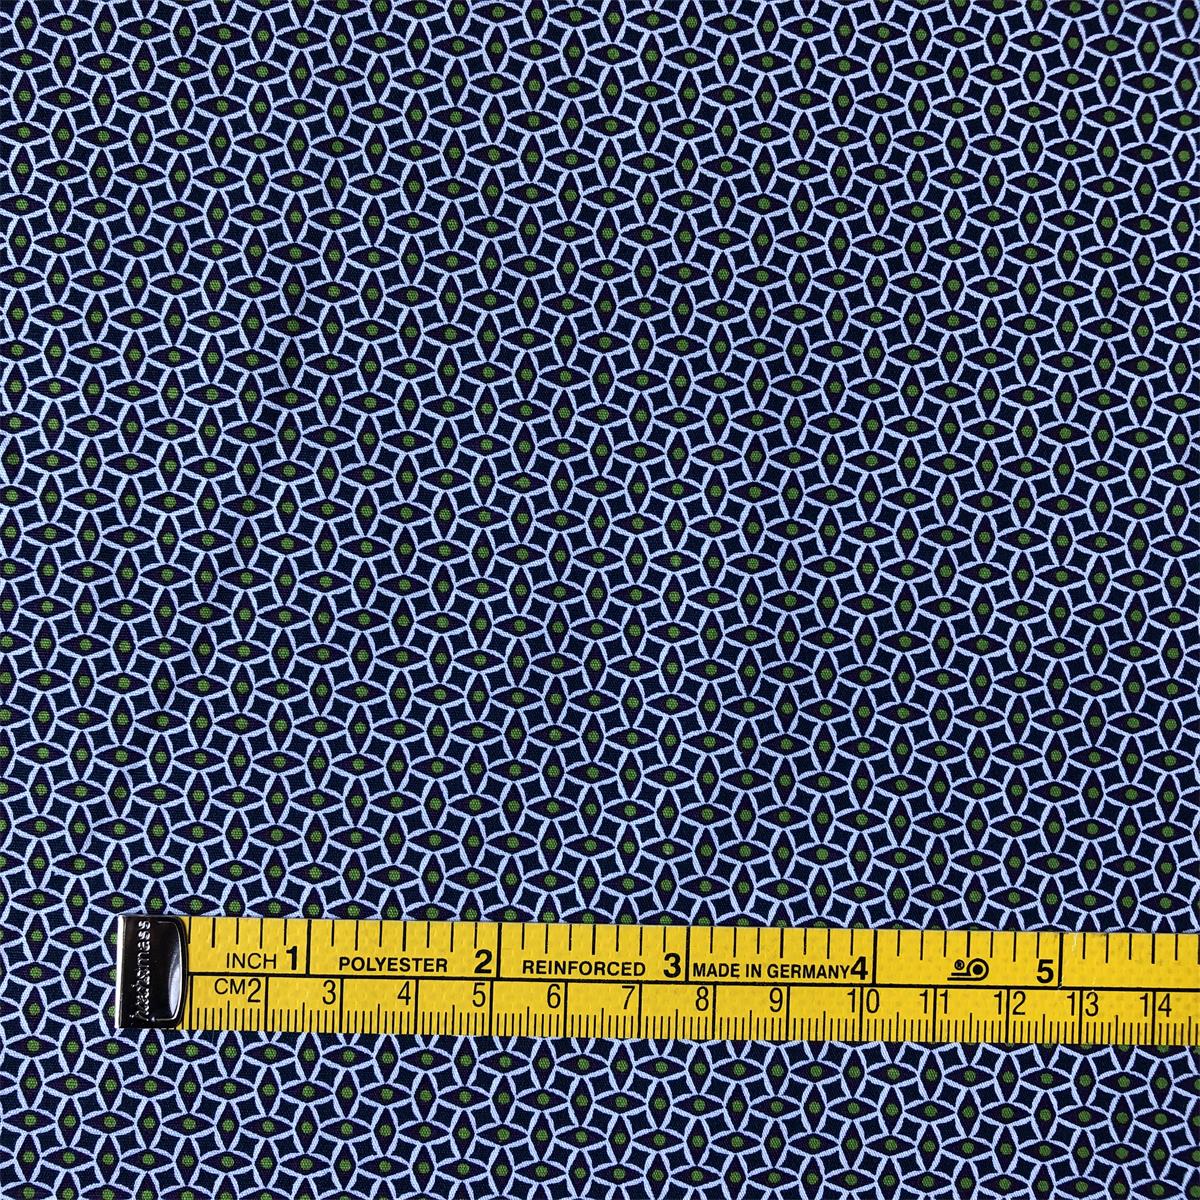 Sun-rising Textile Cotton Printed fabric hot sale high quality soft 100% cotton poplin printed fabric for men's shirts